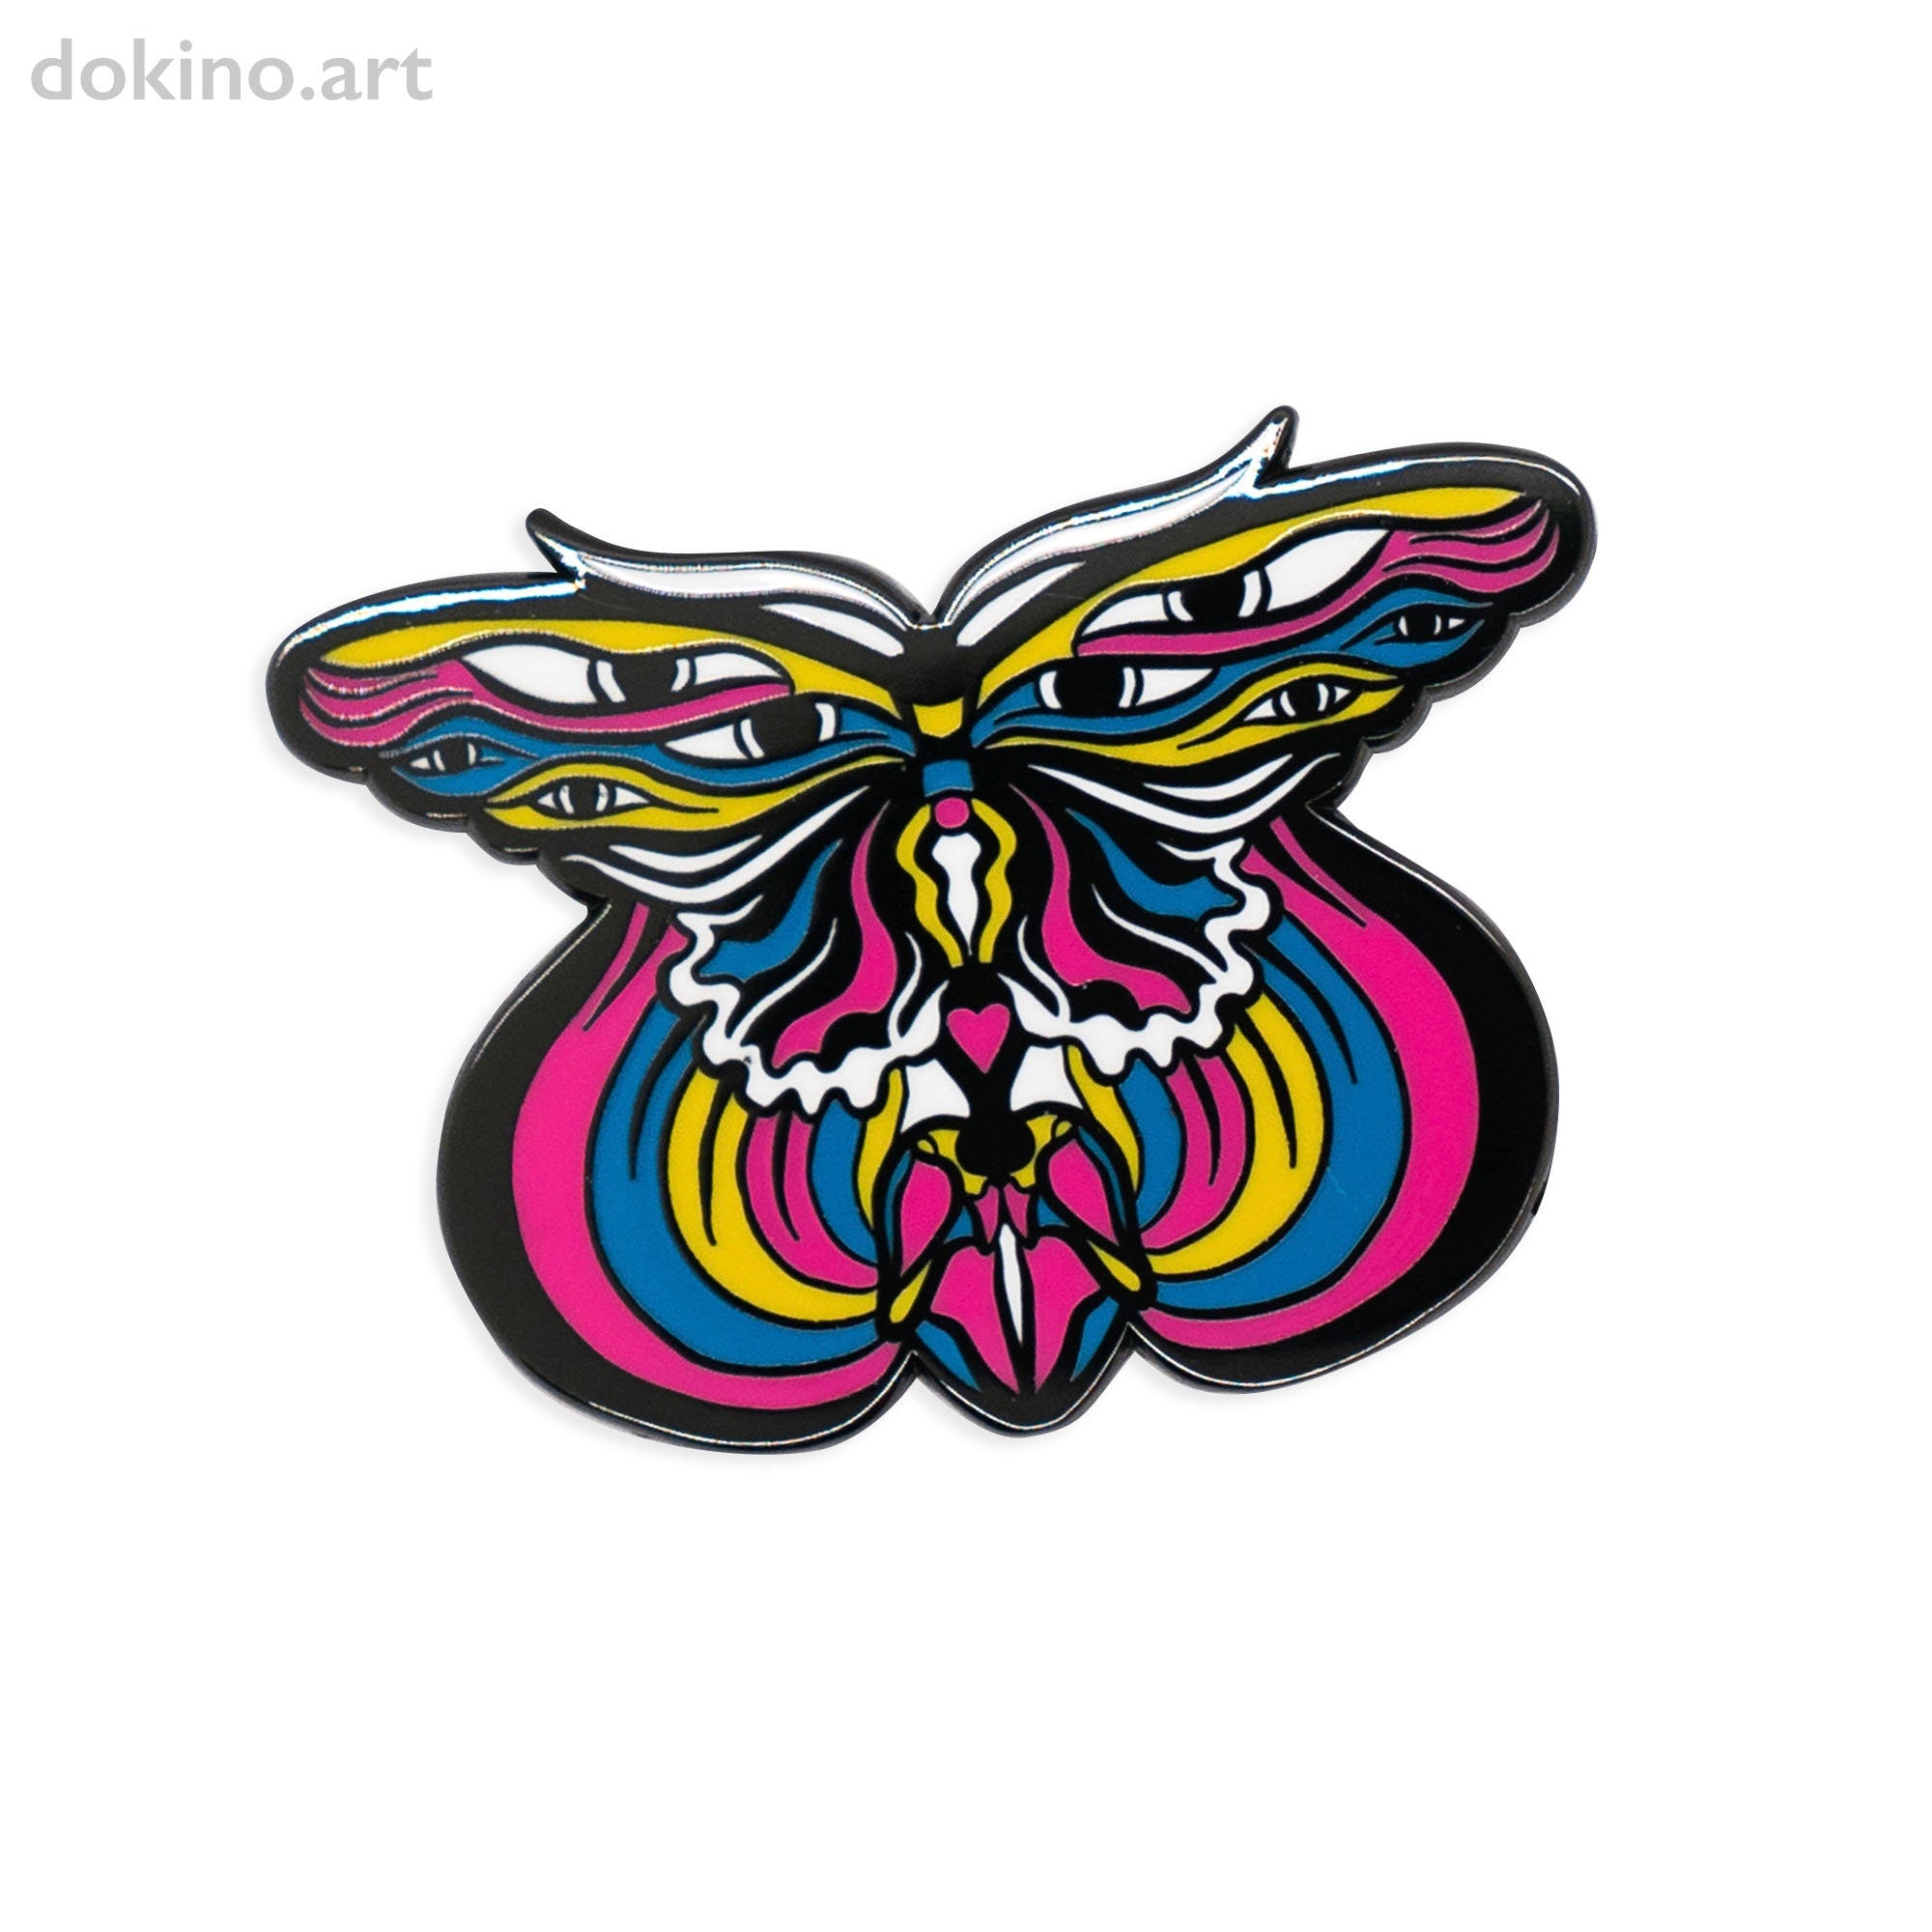 Butterfly Eyes Colorful Neon Hard Enamel Pin Beautiful Shiny Botanical Abstract Design